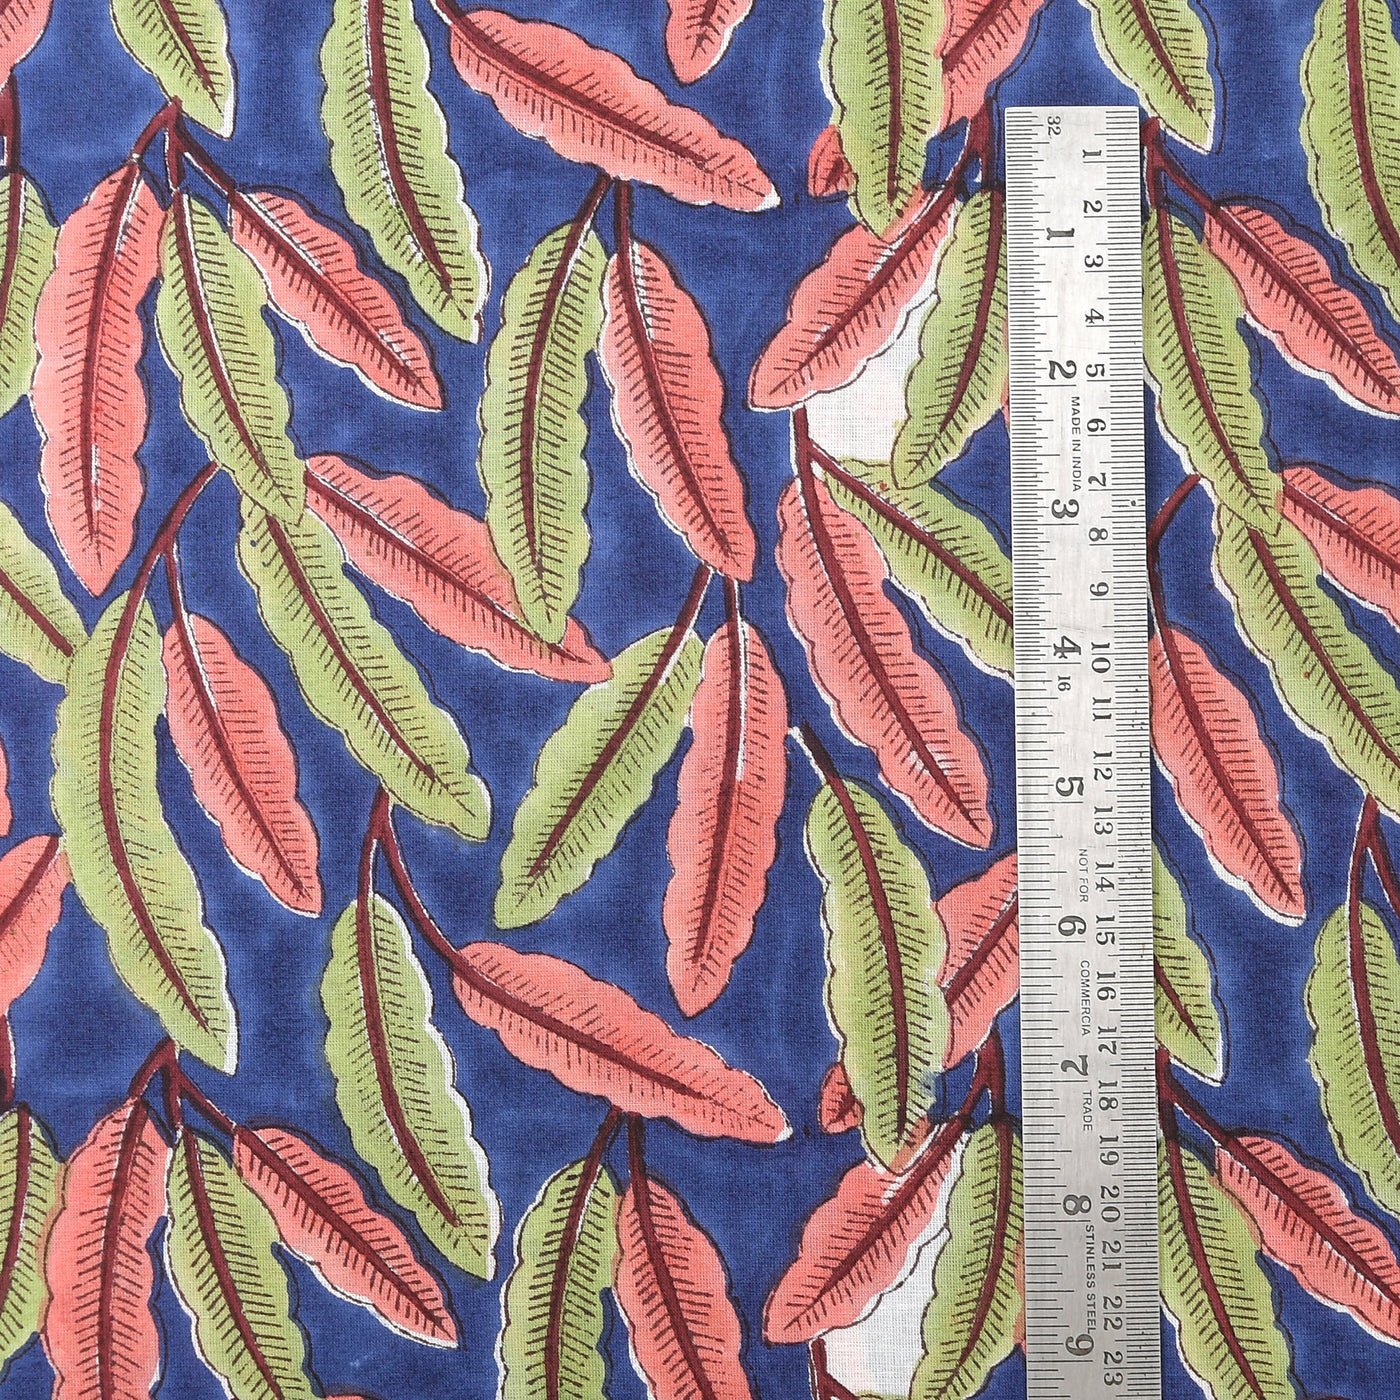 Space Blue, Russian Green, Thulian Pink Floral Indian Block Printed 100% Pure Cotton Cloth, Fabric by the yard, Women's Clothing Curtains